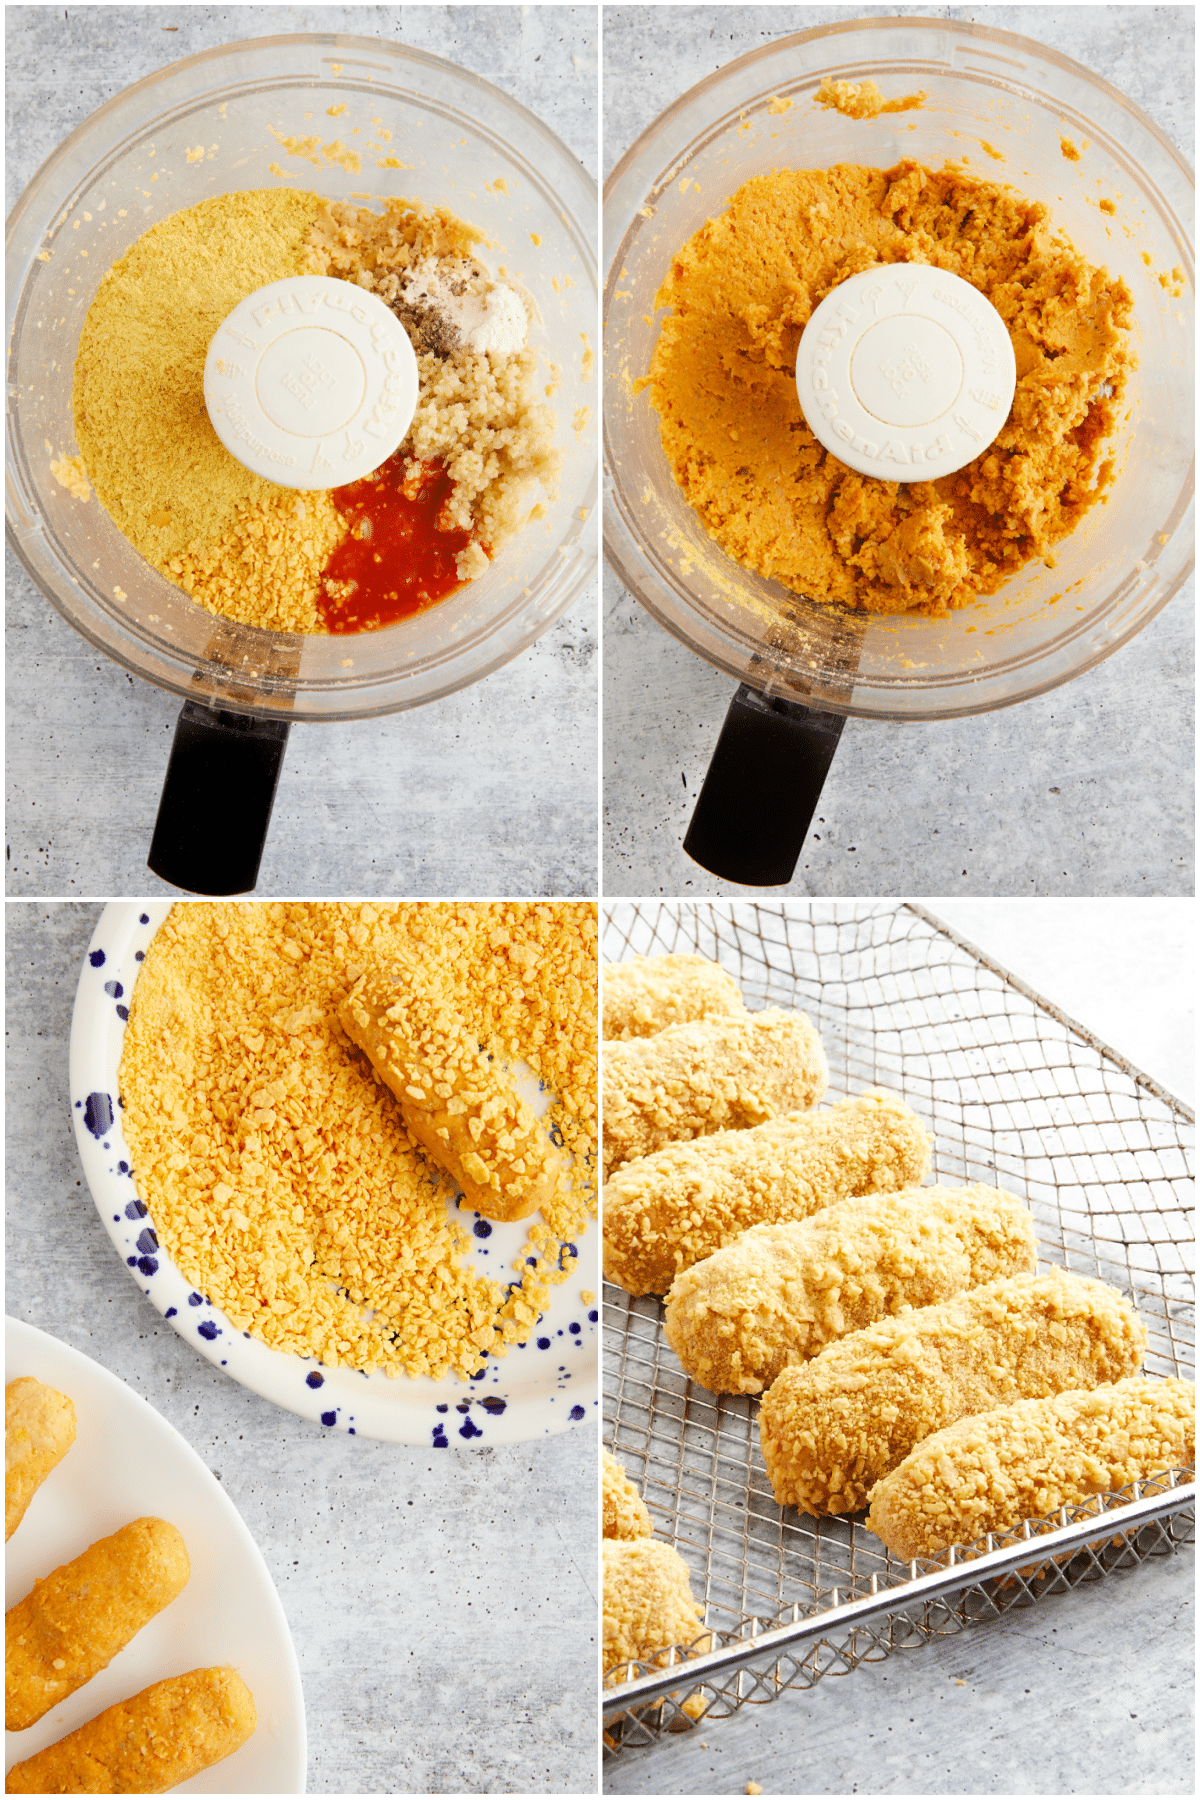 Four image collage showing how to make vegan buffalo wings: add corn flake crumbs, cooked quinoa, buffalo sauce, and spices to processed chickpeas and combine. Shape into wings, coat with more corn flake crumbs, and bake or air fry.